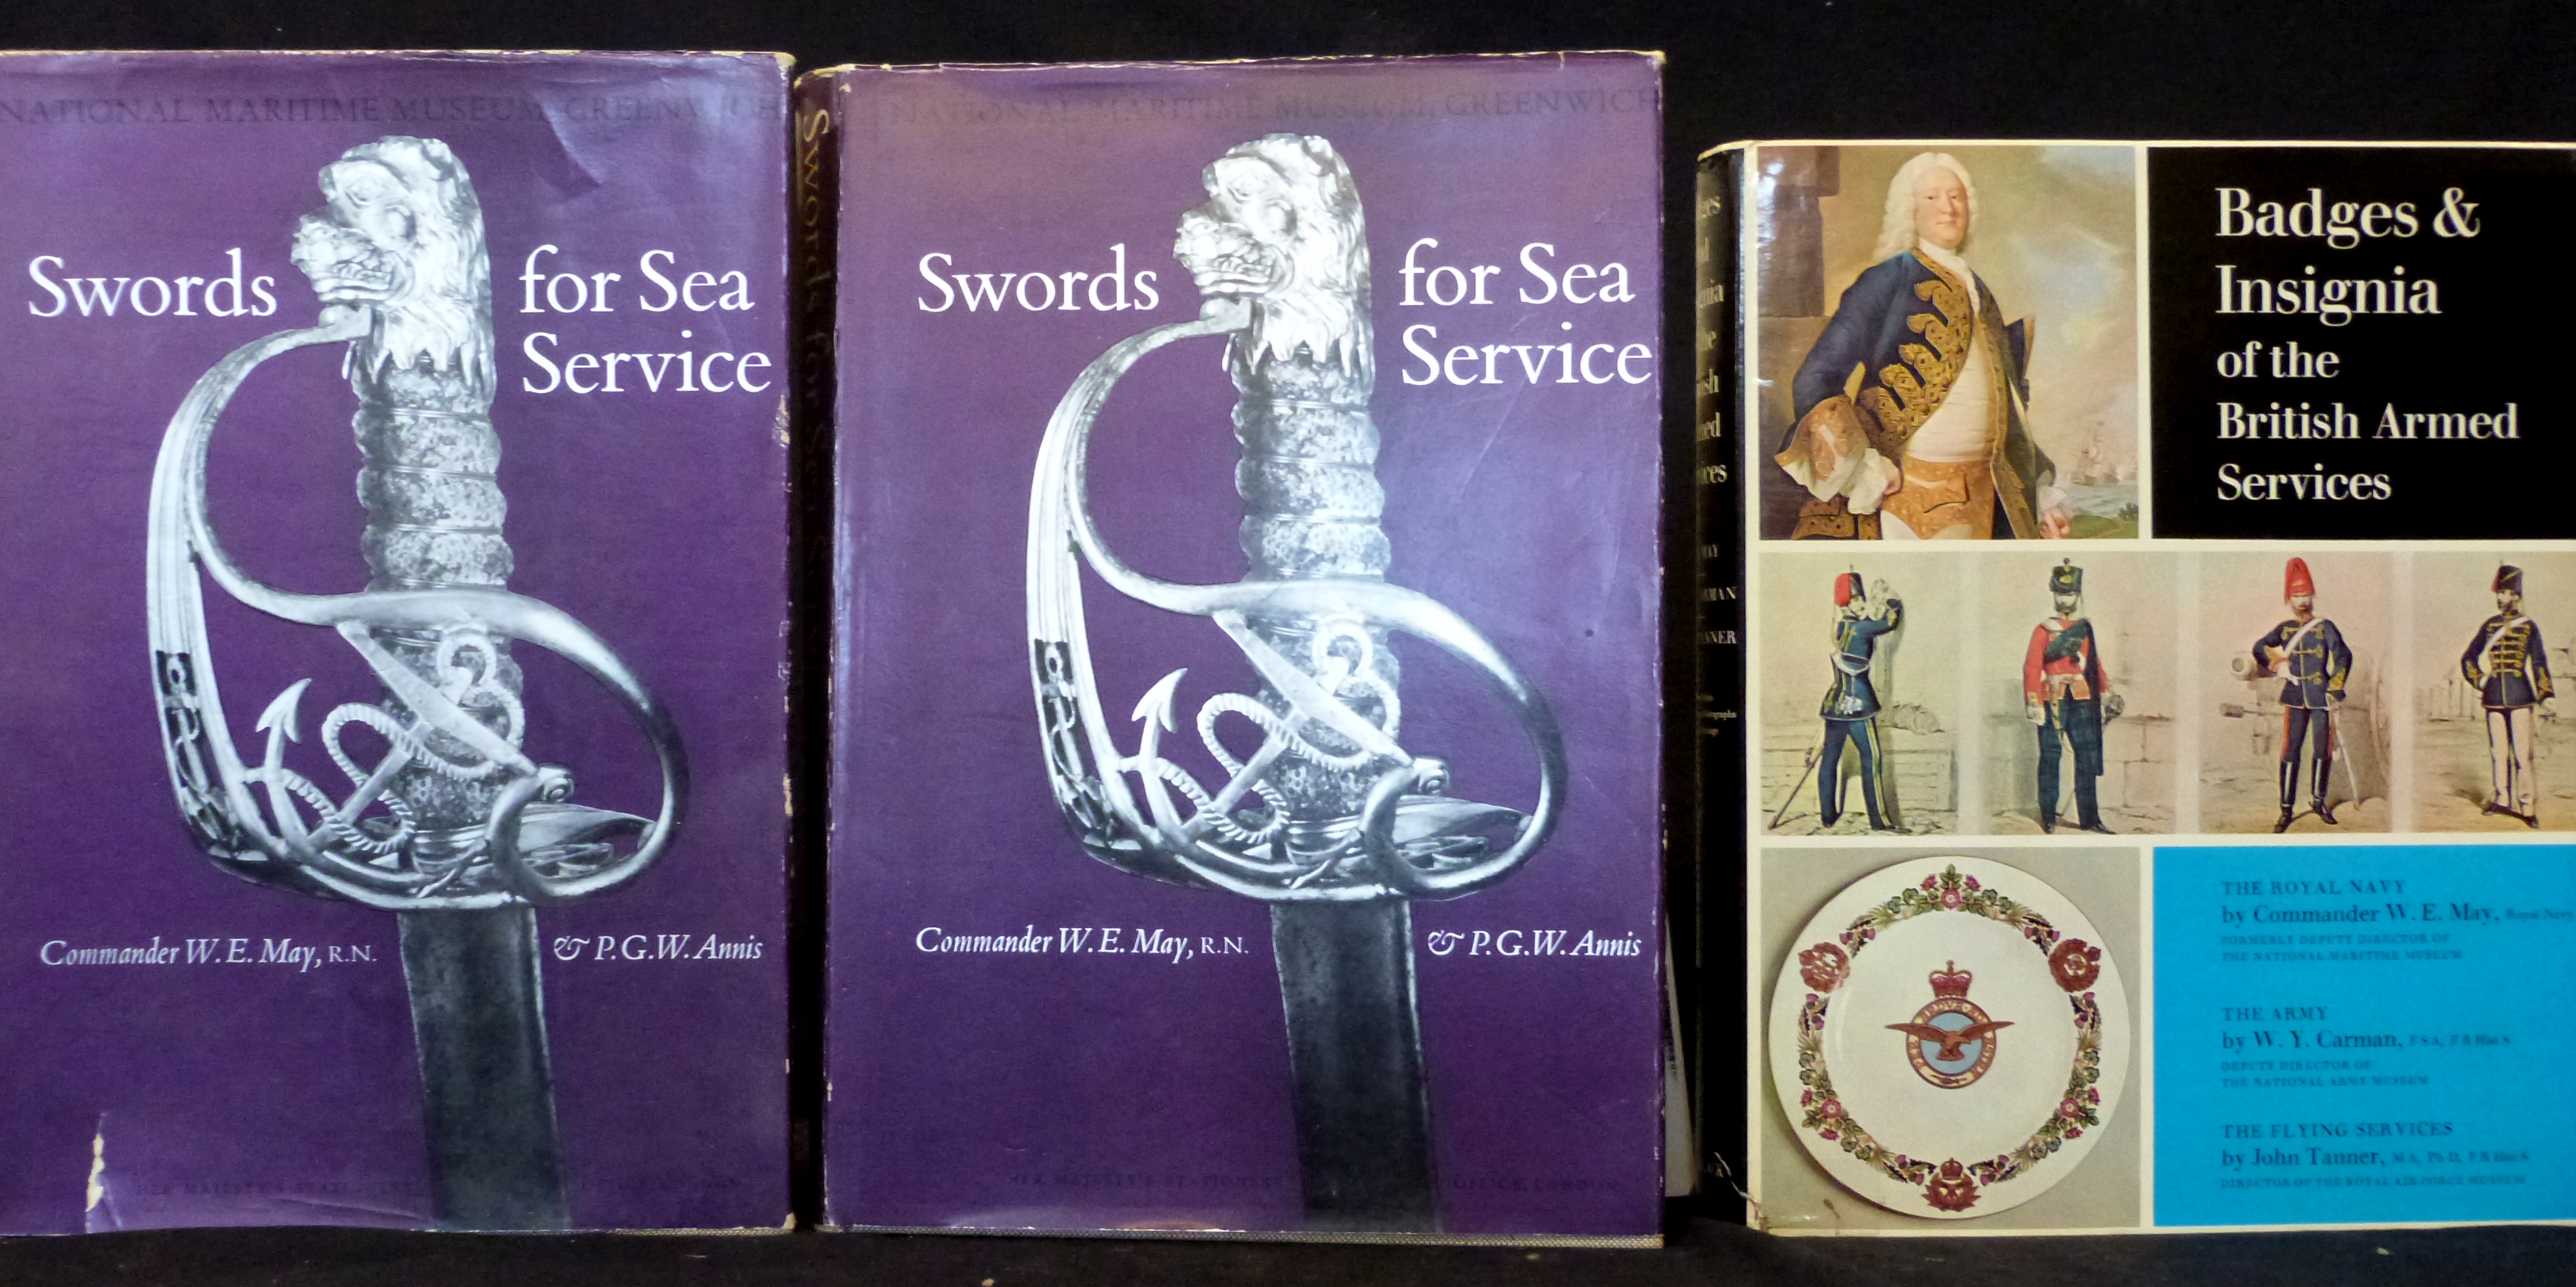 WILLIAM EDWARD MAY & PHILIP GEOFFRY WALTER ANNIS: SWORDS FOR SEA SERVICE, London, HMSO, 1st edition,